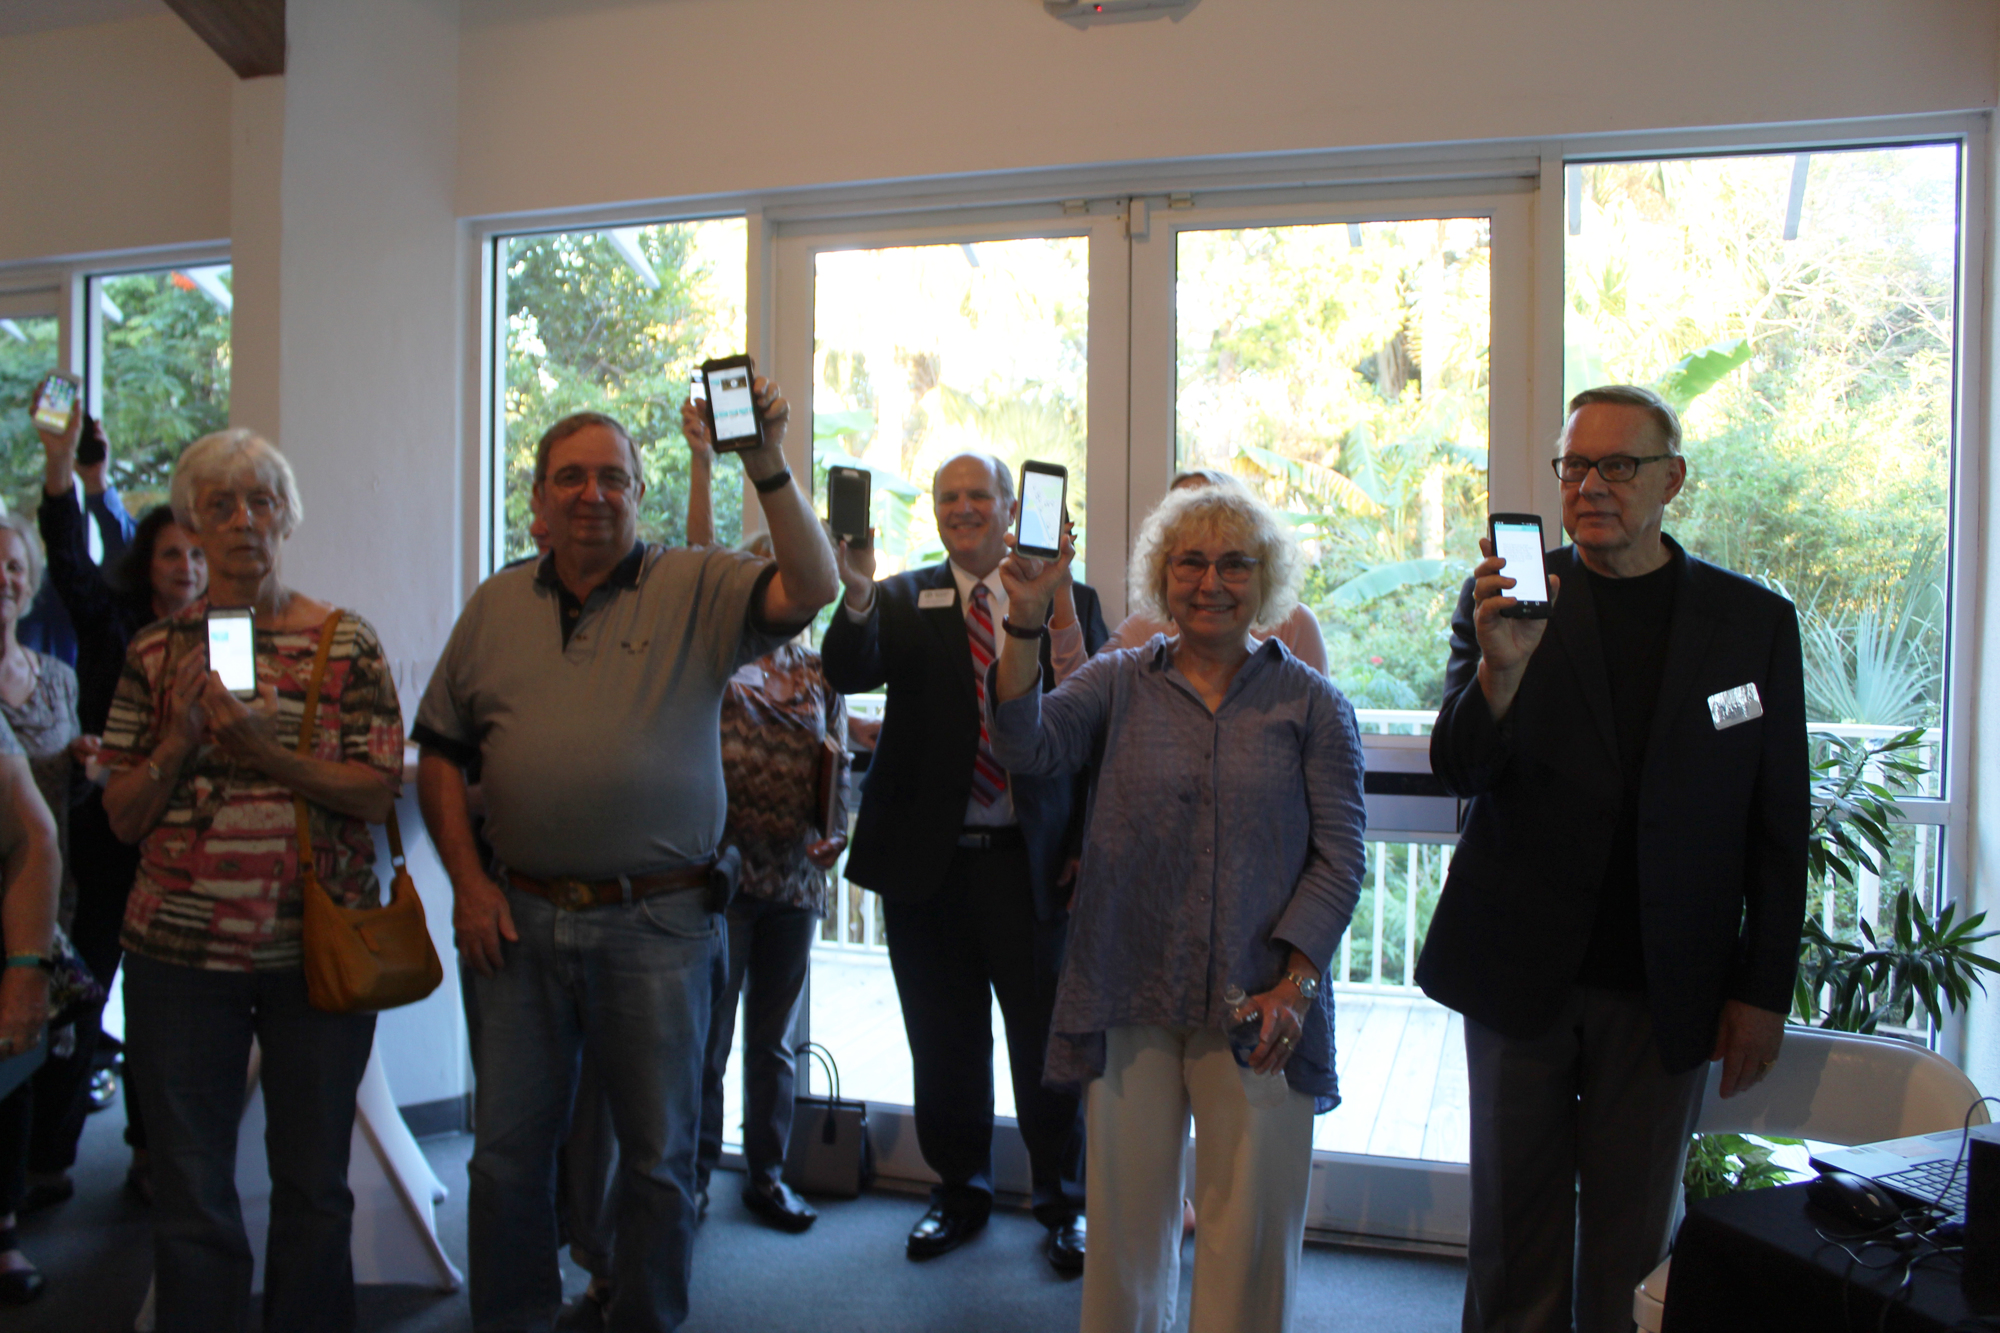 Ormond Beach Mayor Bill Partington and other residents hold up their phones during the Ormond Beach Historical Society's ceremonial app download on Wednesday, Nov. 29. Photo by Jarleene Almenas